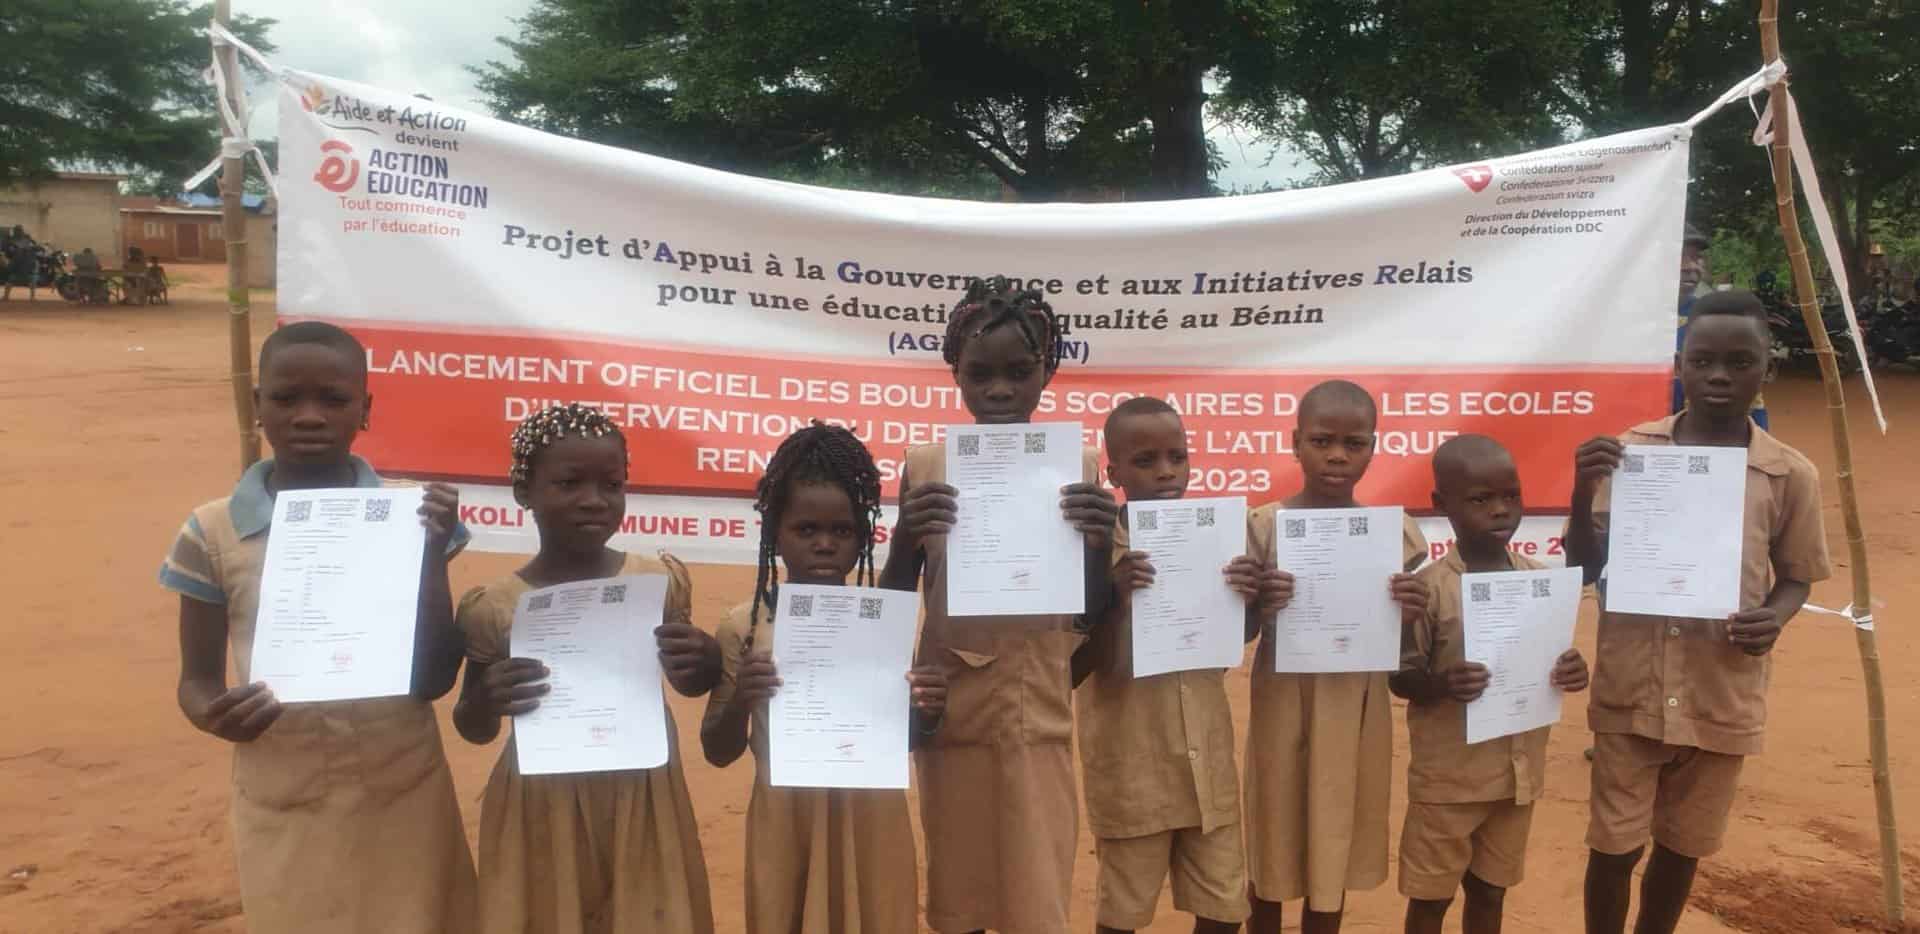 Delivery of school supplies and birth certificates to disadvantaged pupils in Benin